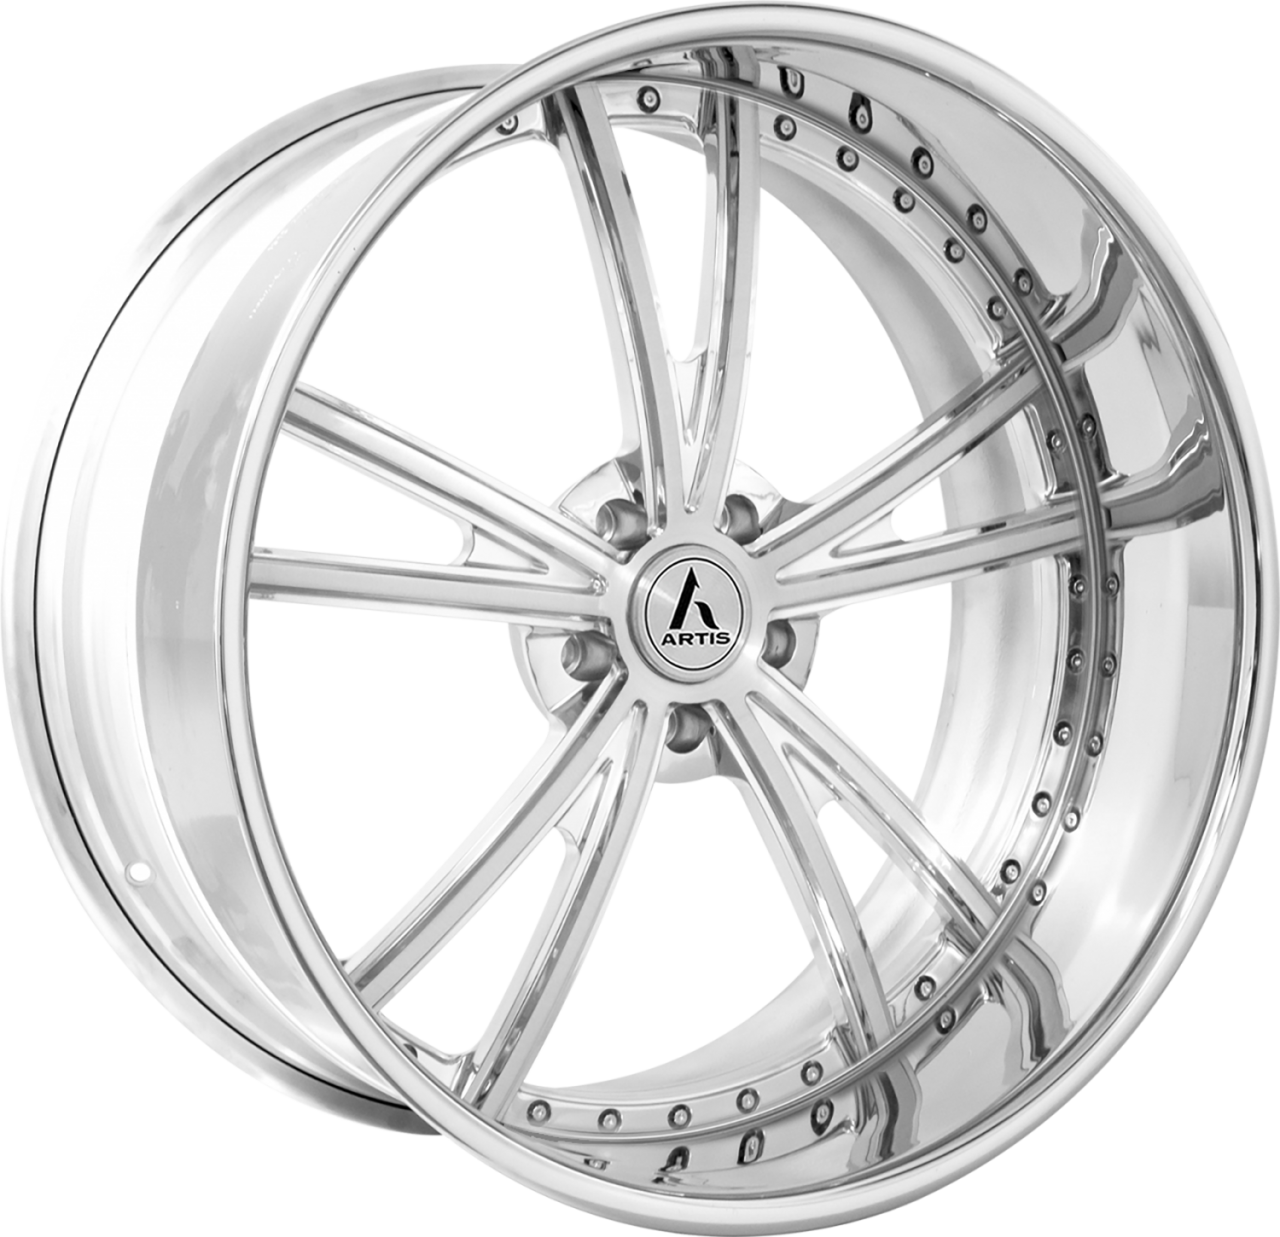 Artis Forged Corvair-M wheel with Brushed and Polished finish